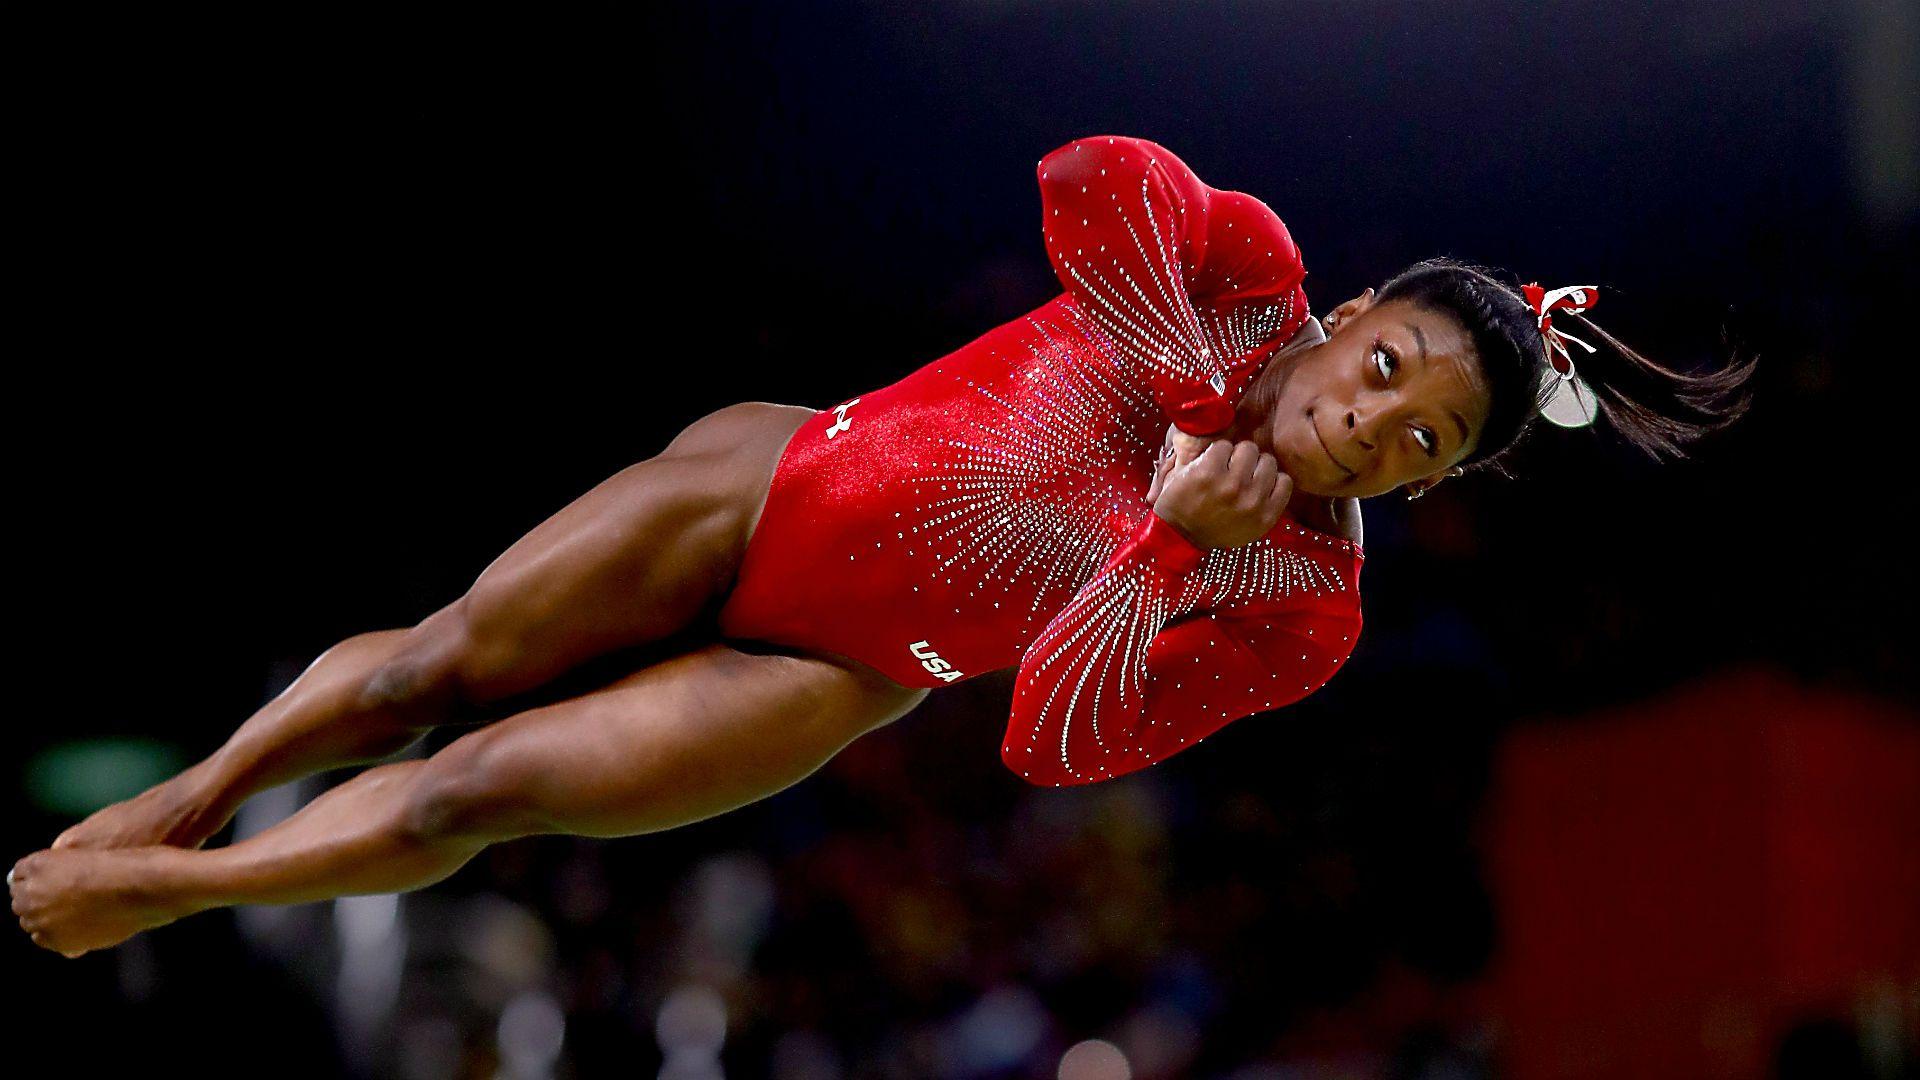 Rio Olympics 2016: Simone Biles wins gold medal in the vault.